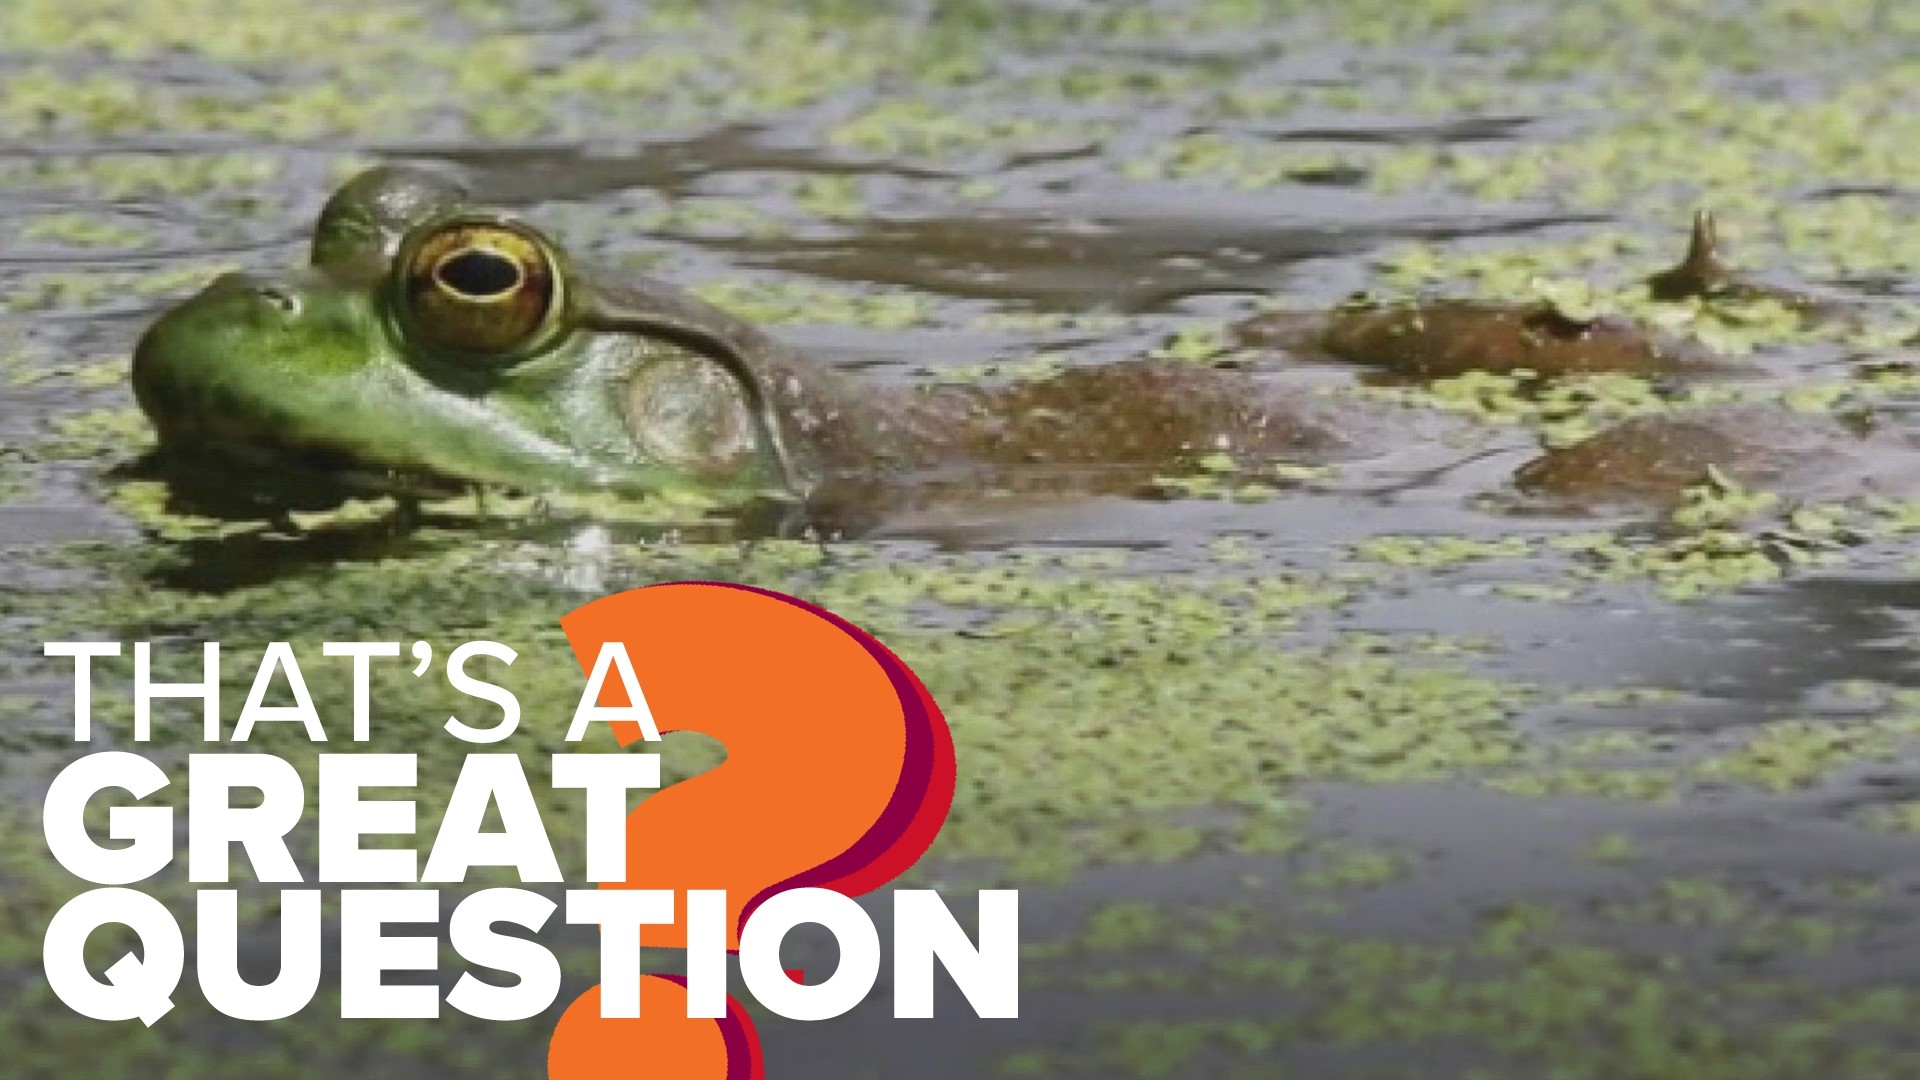 Most Arkansas hunters know the rules for hunting deer and ducks, but what about bullfrogs? The Arkansas Game and Fish Commission explained how it works.